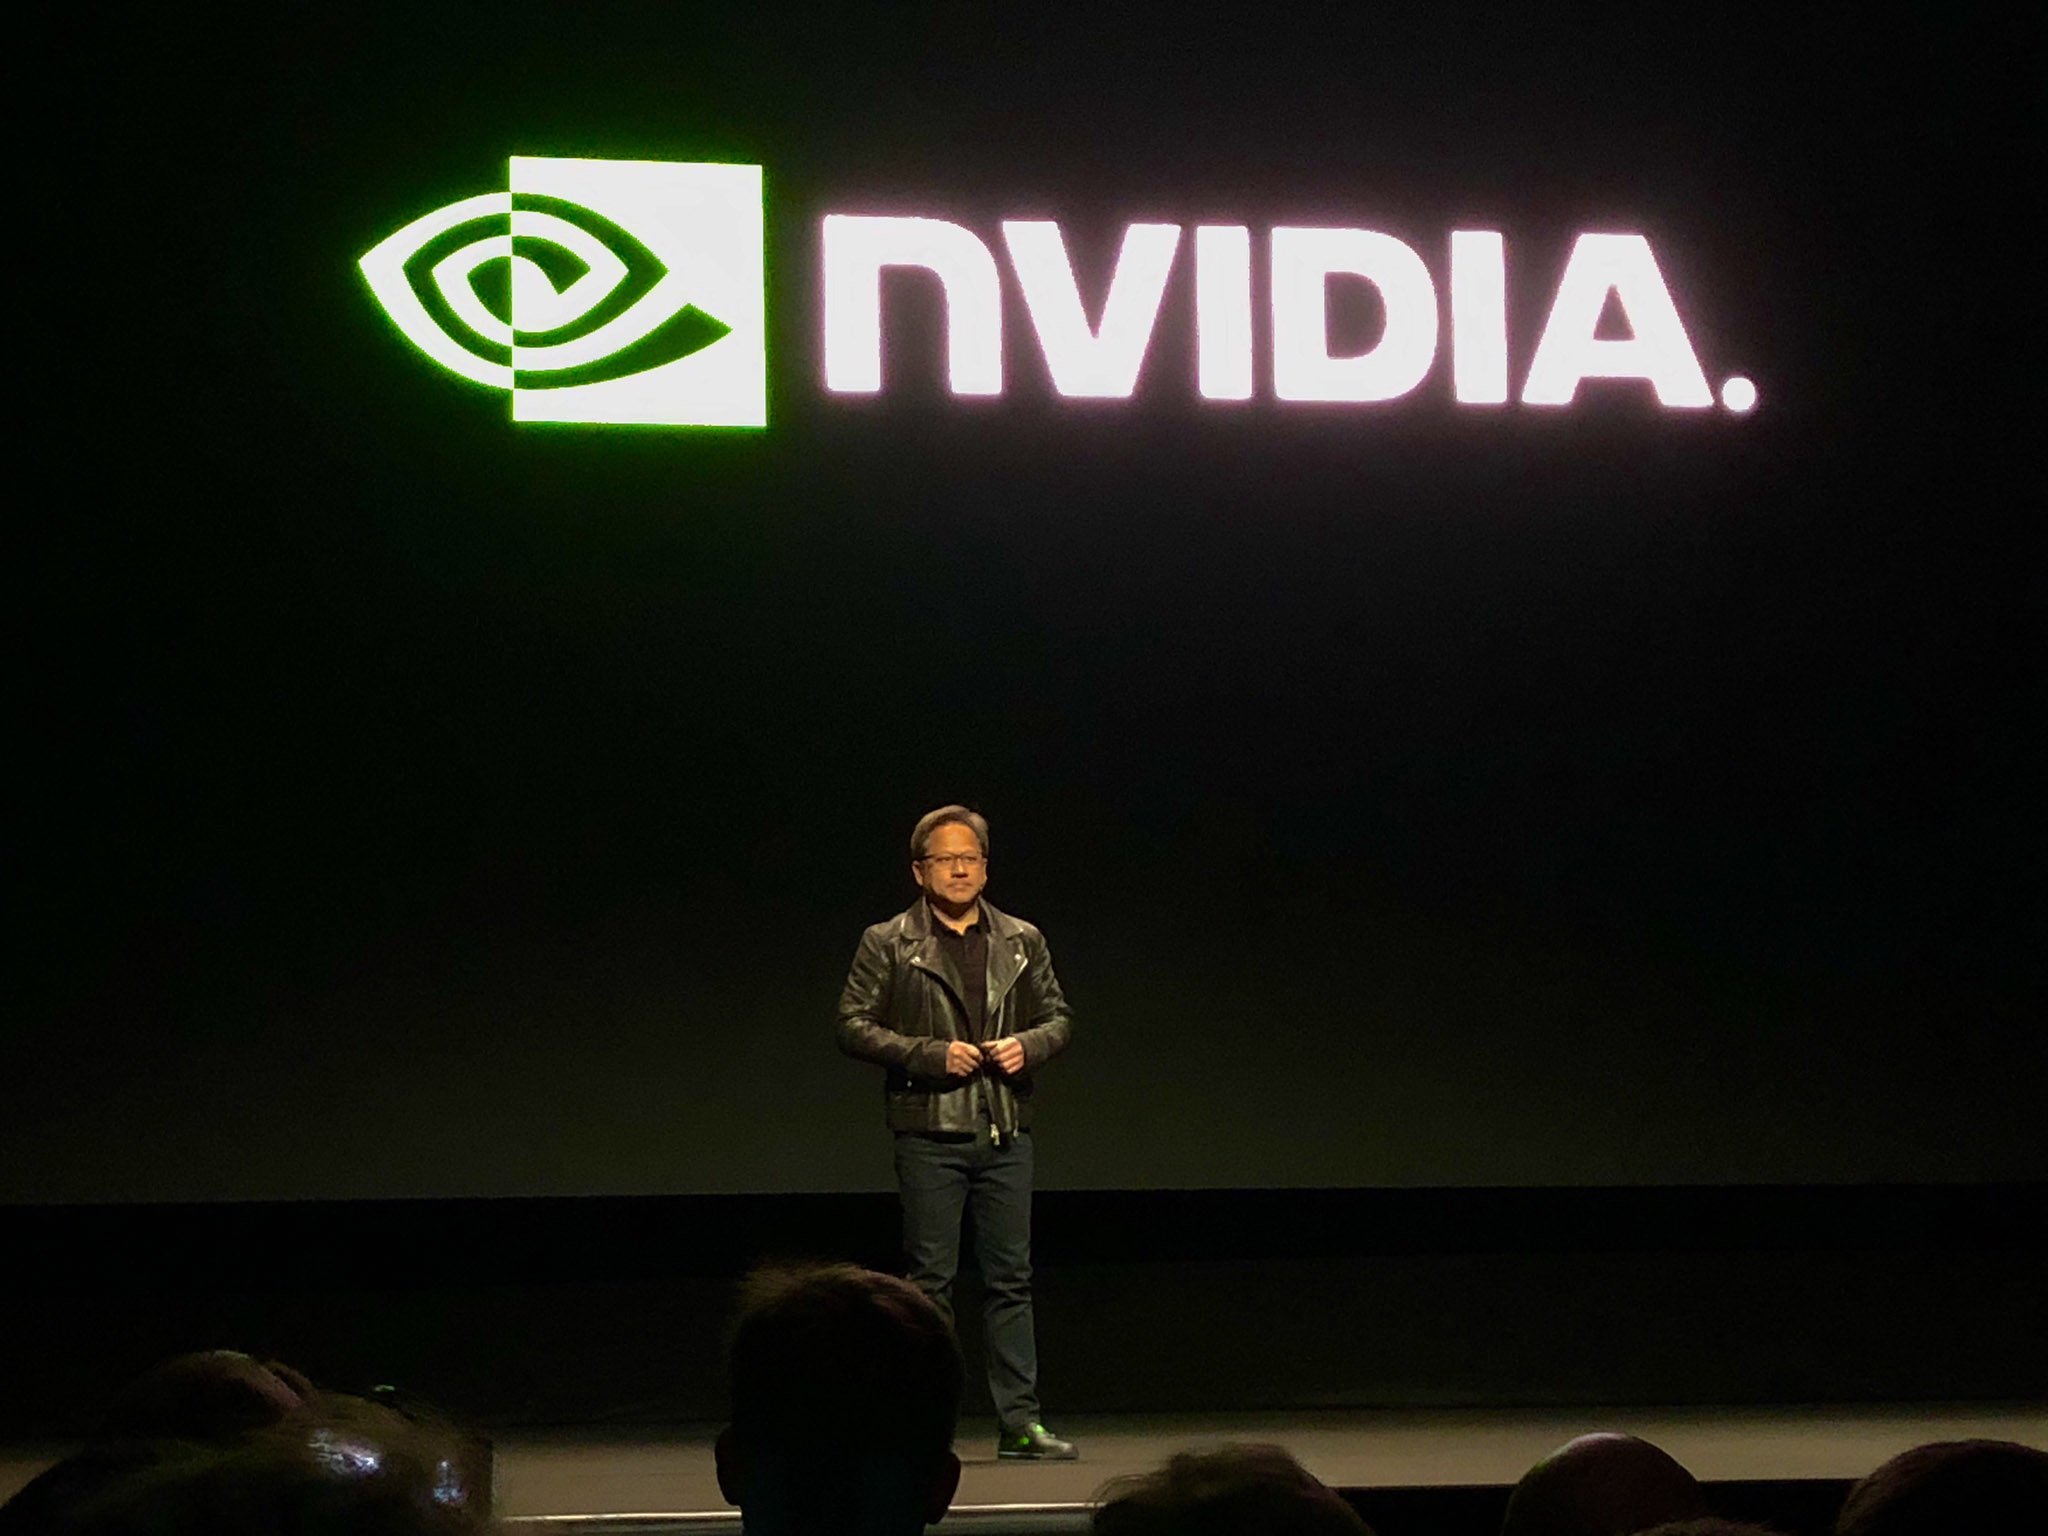 https://www.windowscentral.com/sites/wpcentral.com/files/styles/larger/public/field/image/2018/08/nvidia-rtx-2080-launch.jpg